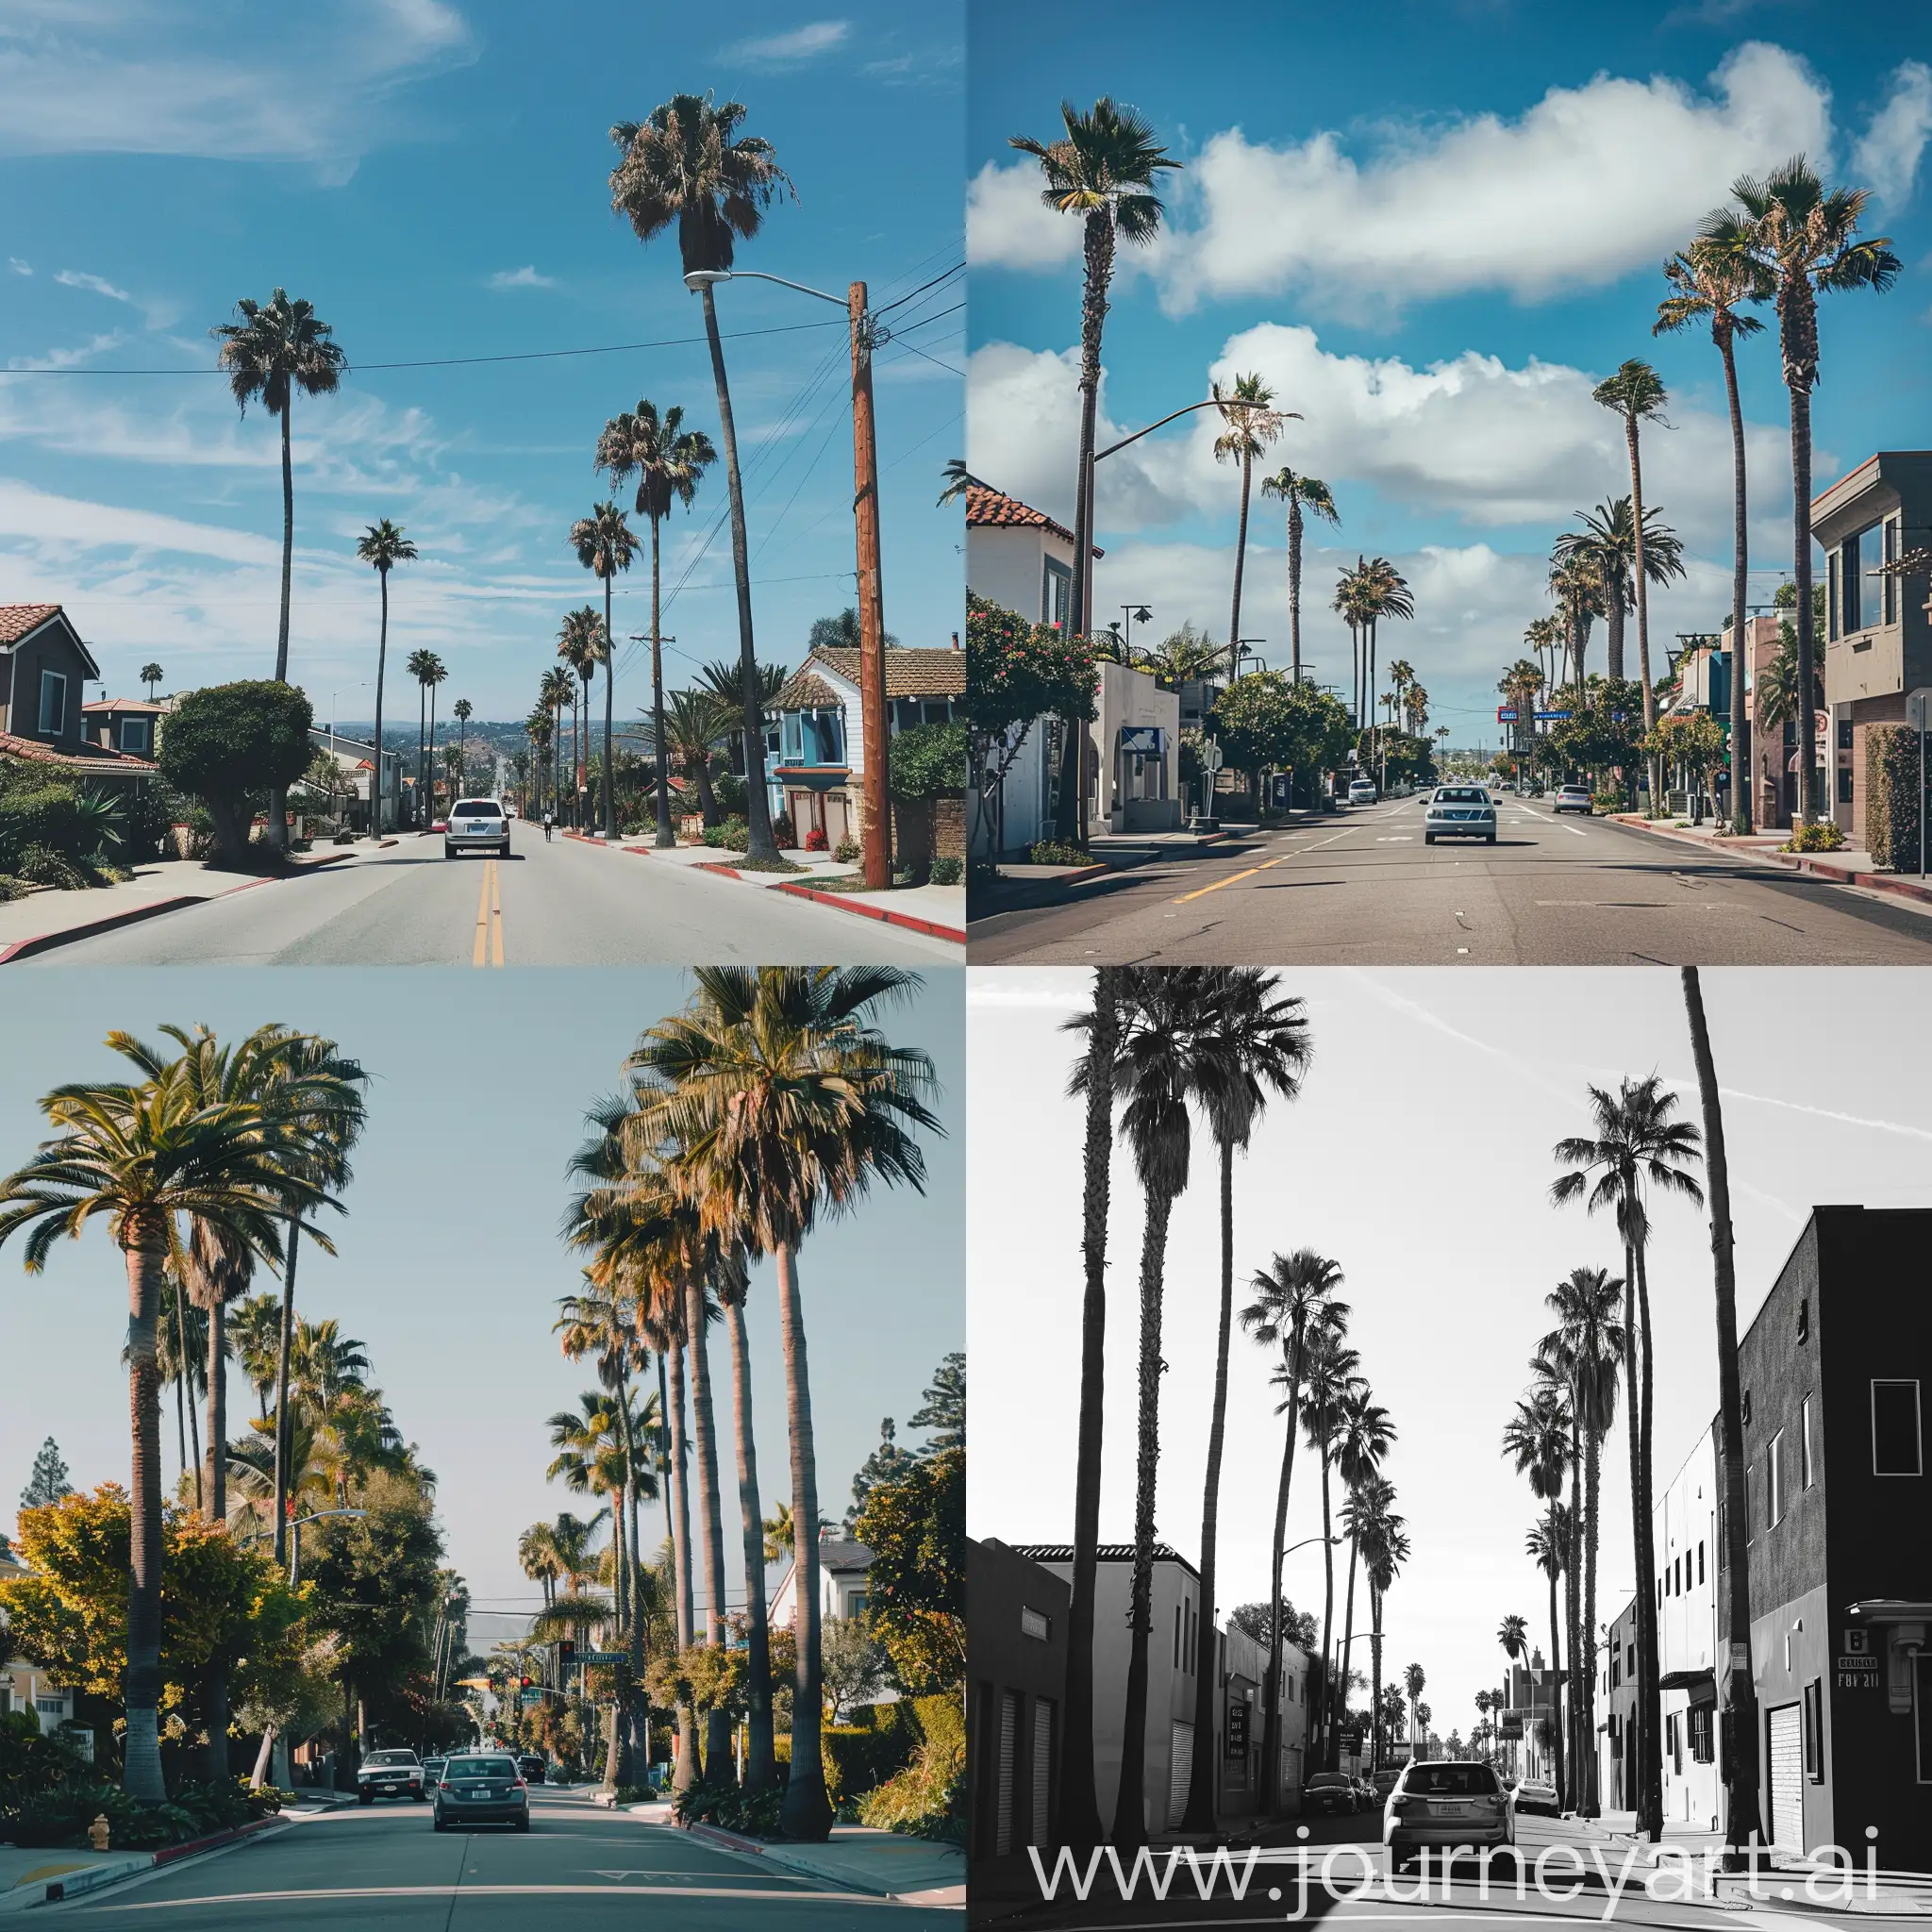 California-City-Street-Scene-with-Palms-and-Passing-Car